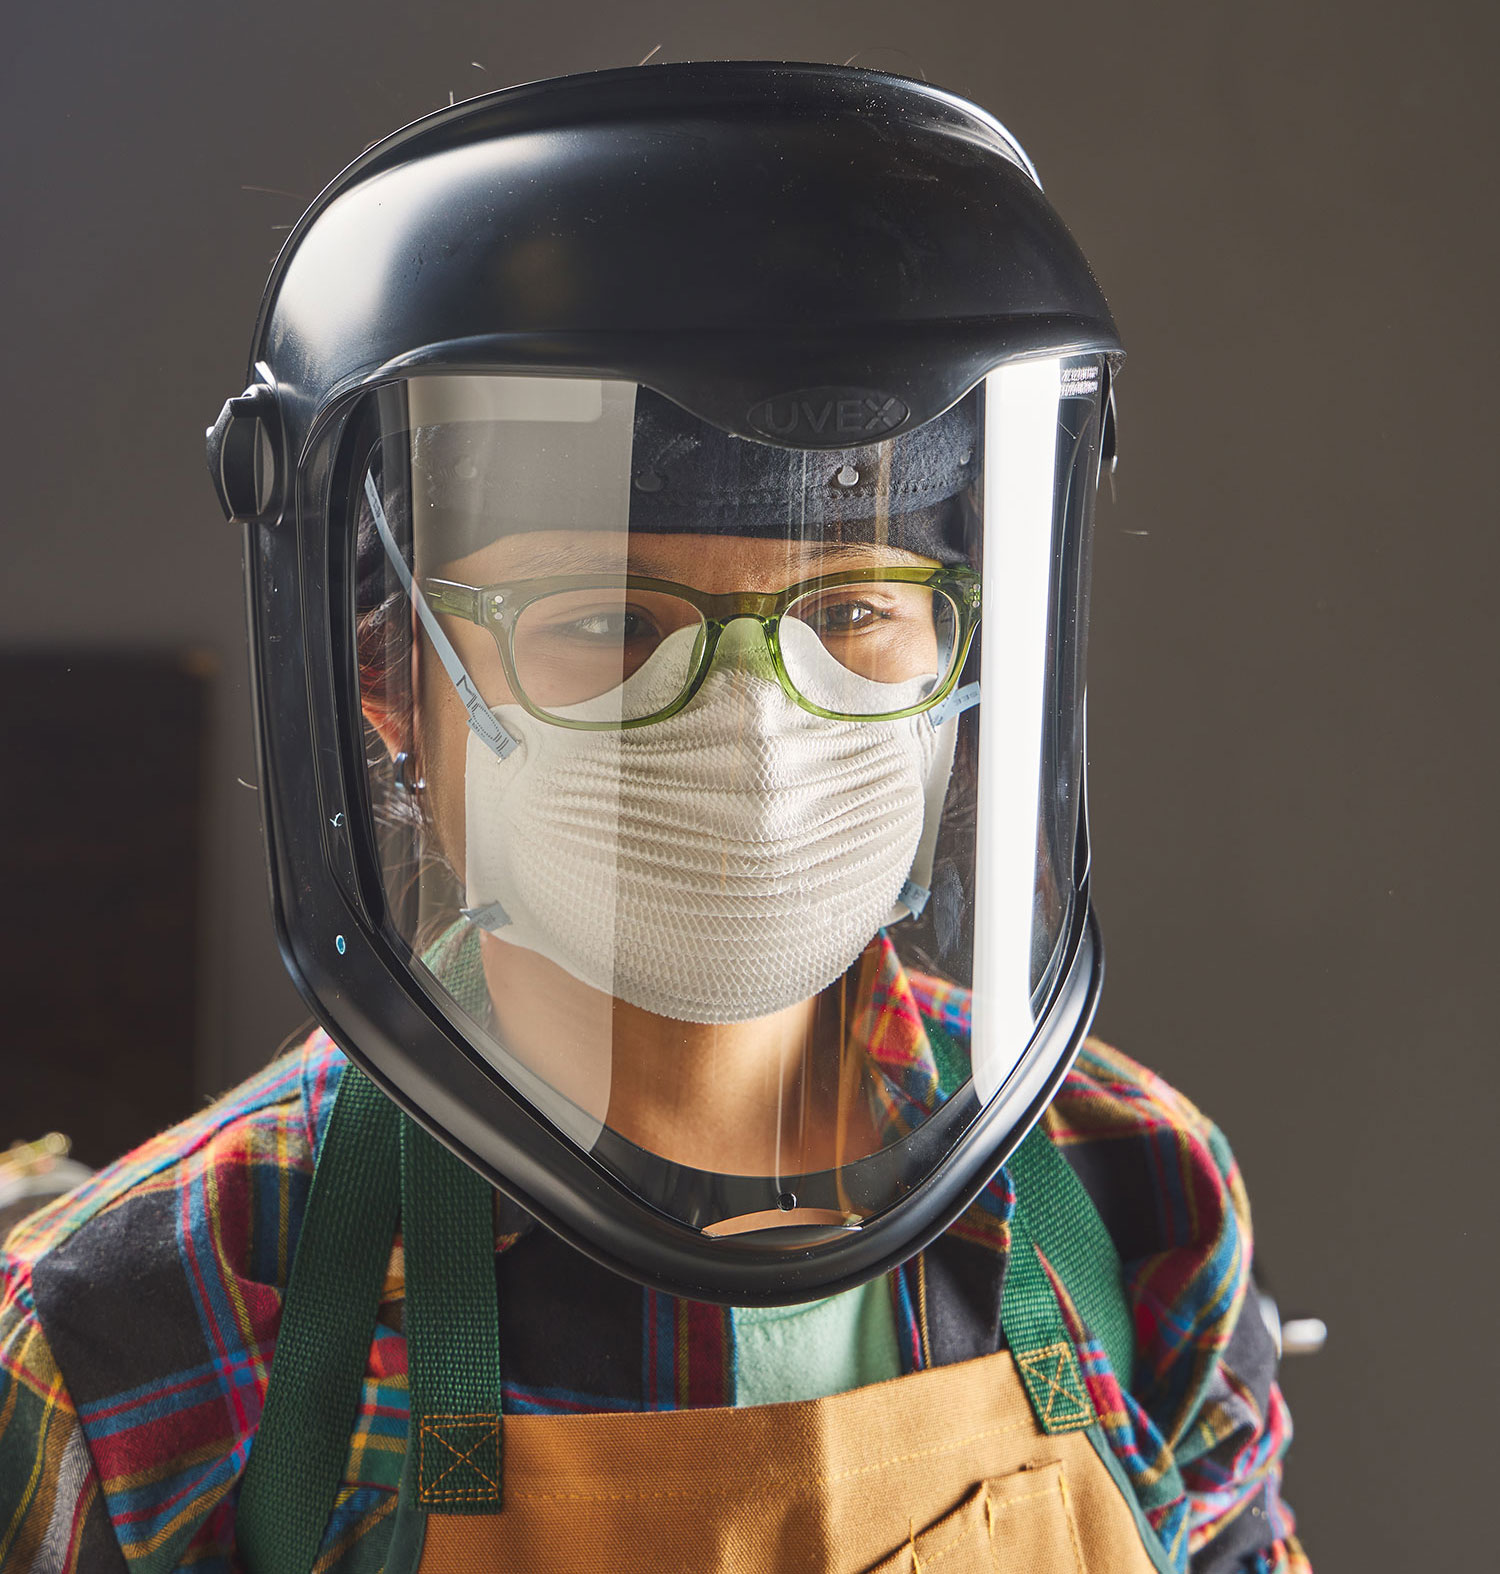 A turner wearing a face shield, dust mask and canvas apron for protection when working on a lathe